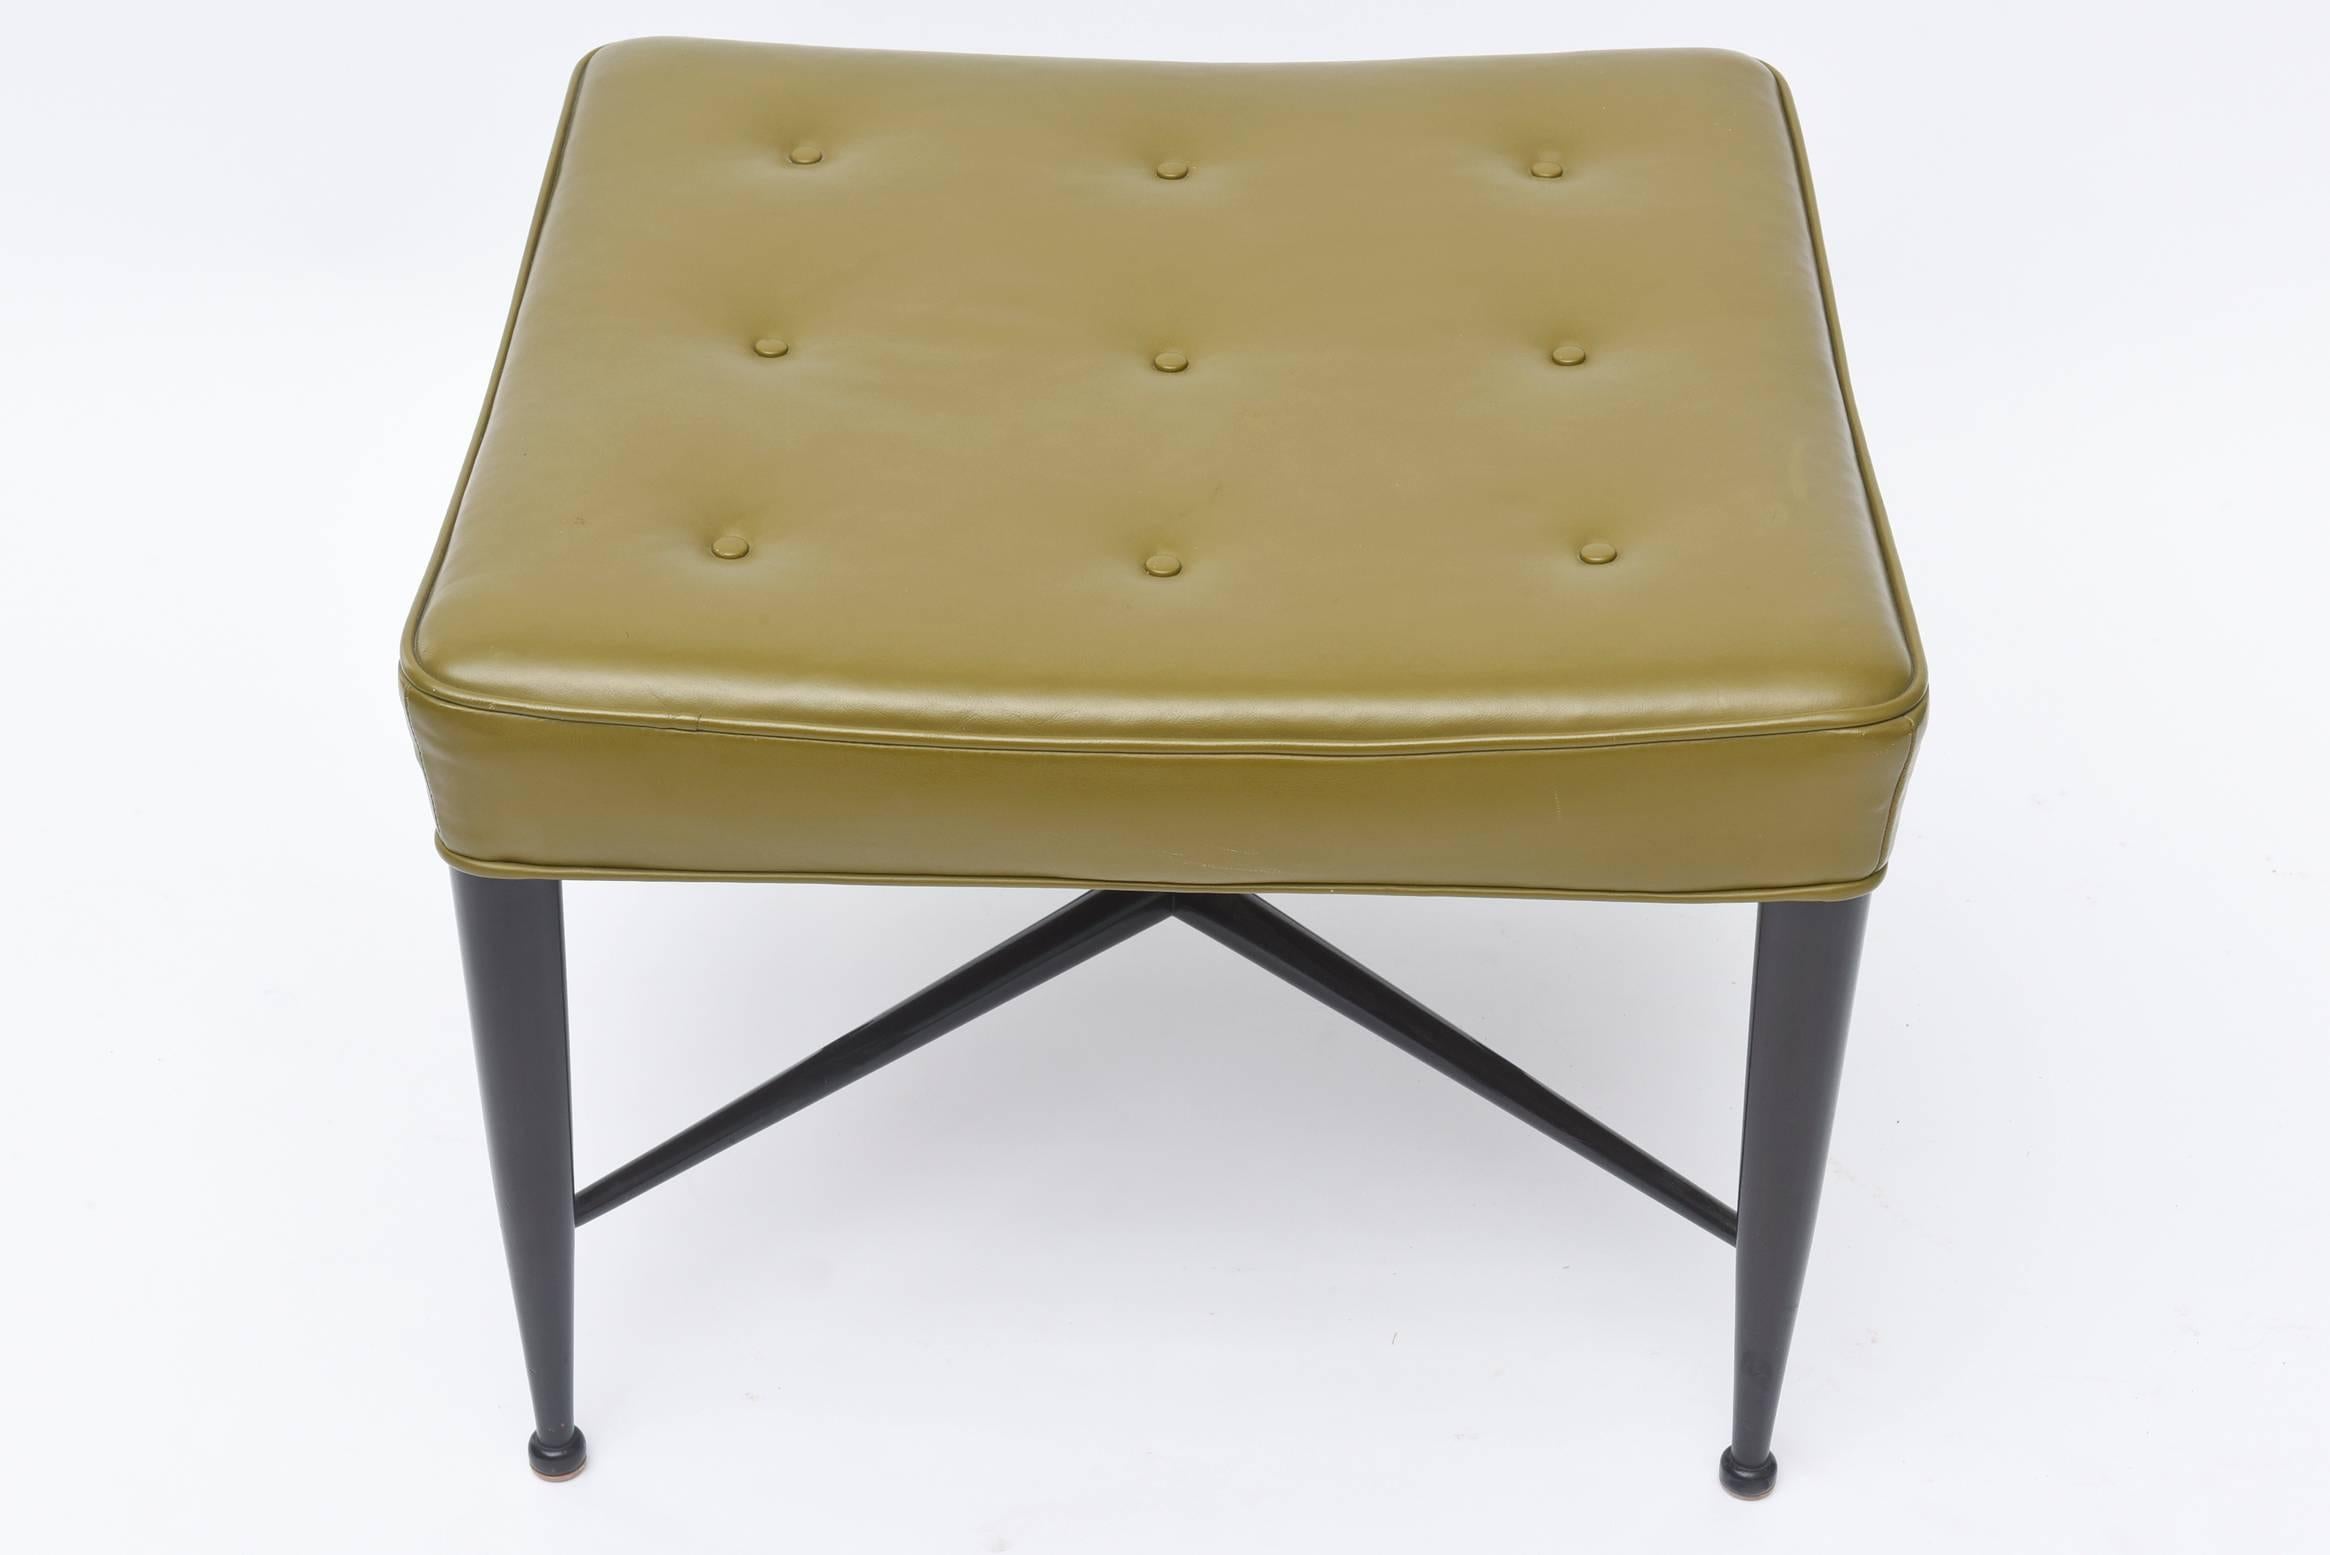 Pair of Edward Wormley stools model #5002.
Manufactured by Dunbar.
Original olive green leather.